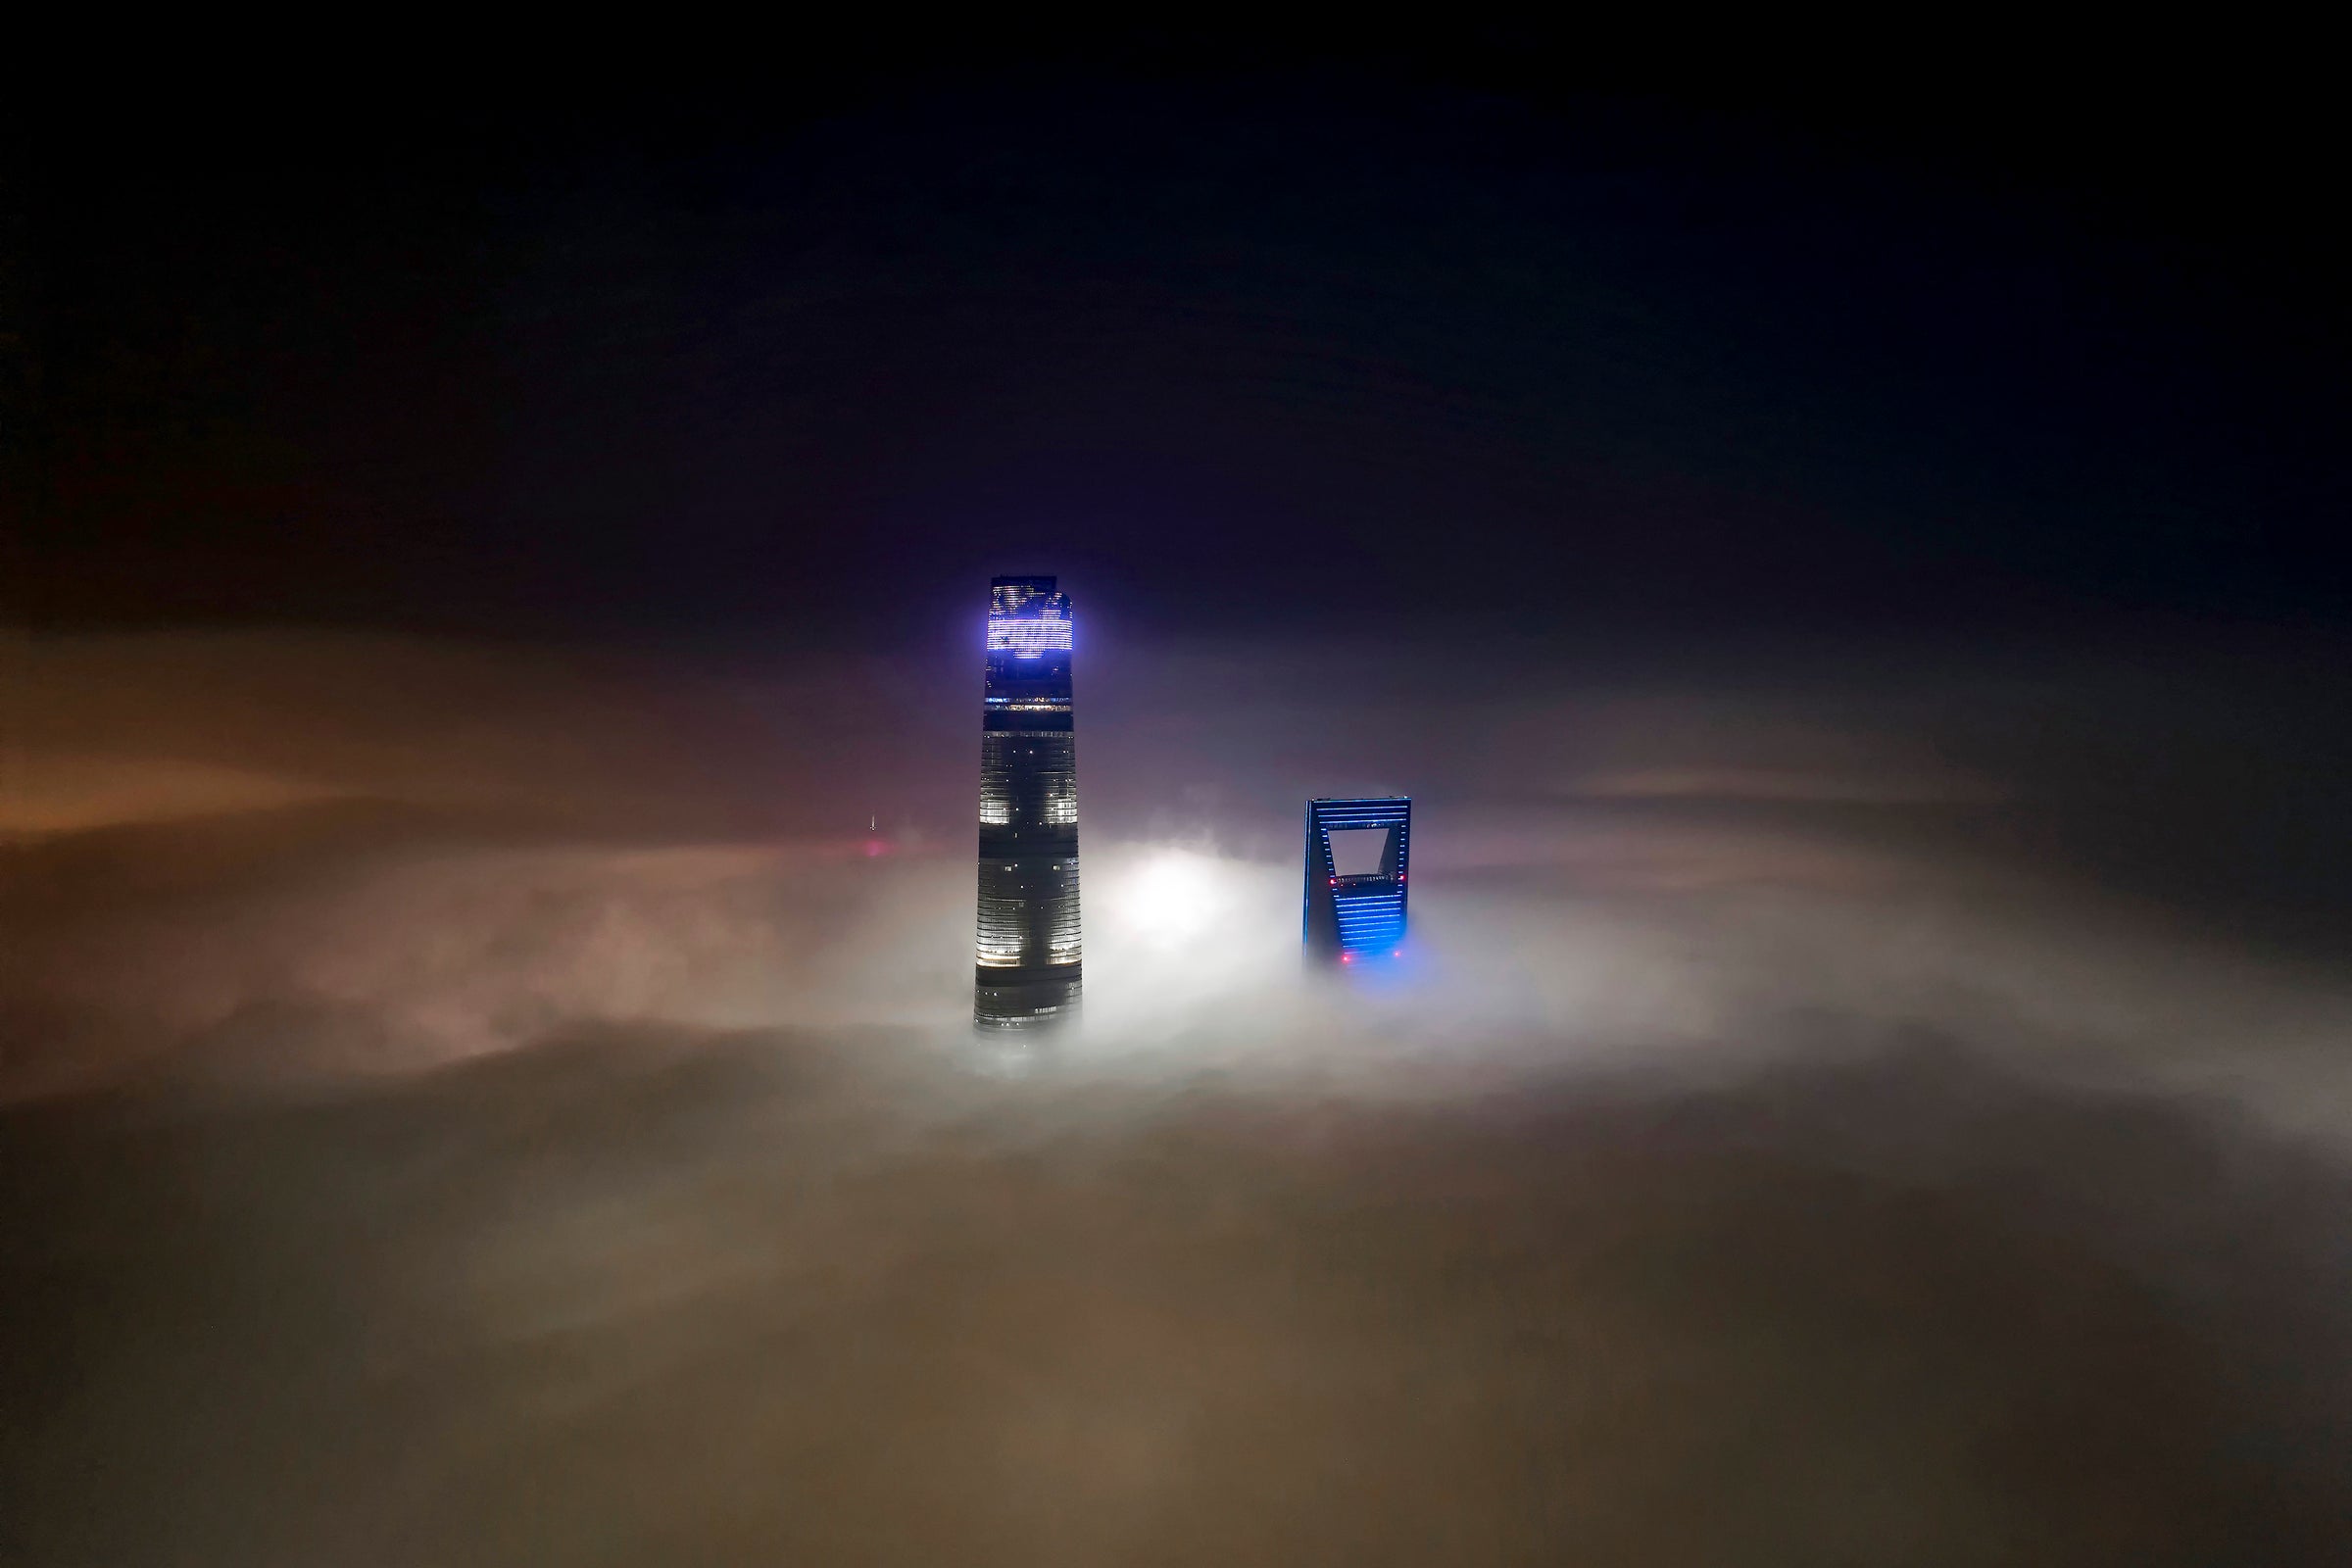 Shanghai tower and Shanghai world financial poke out of the fog at night